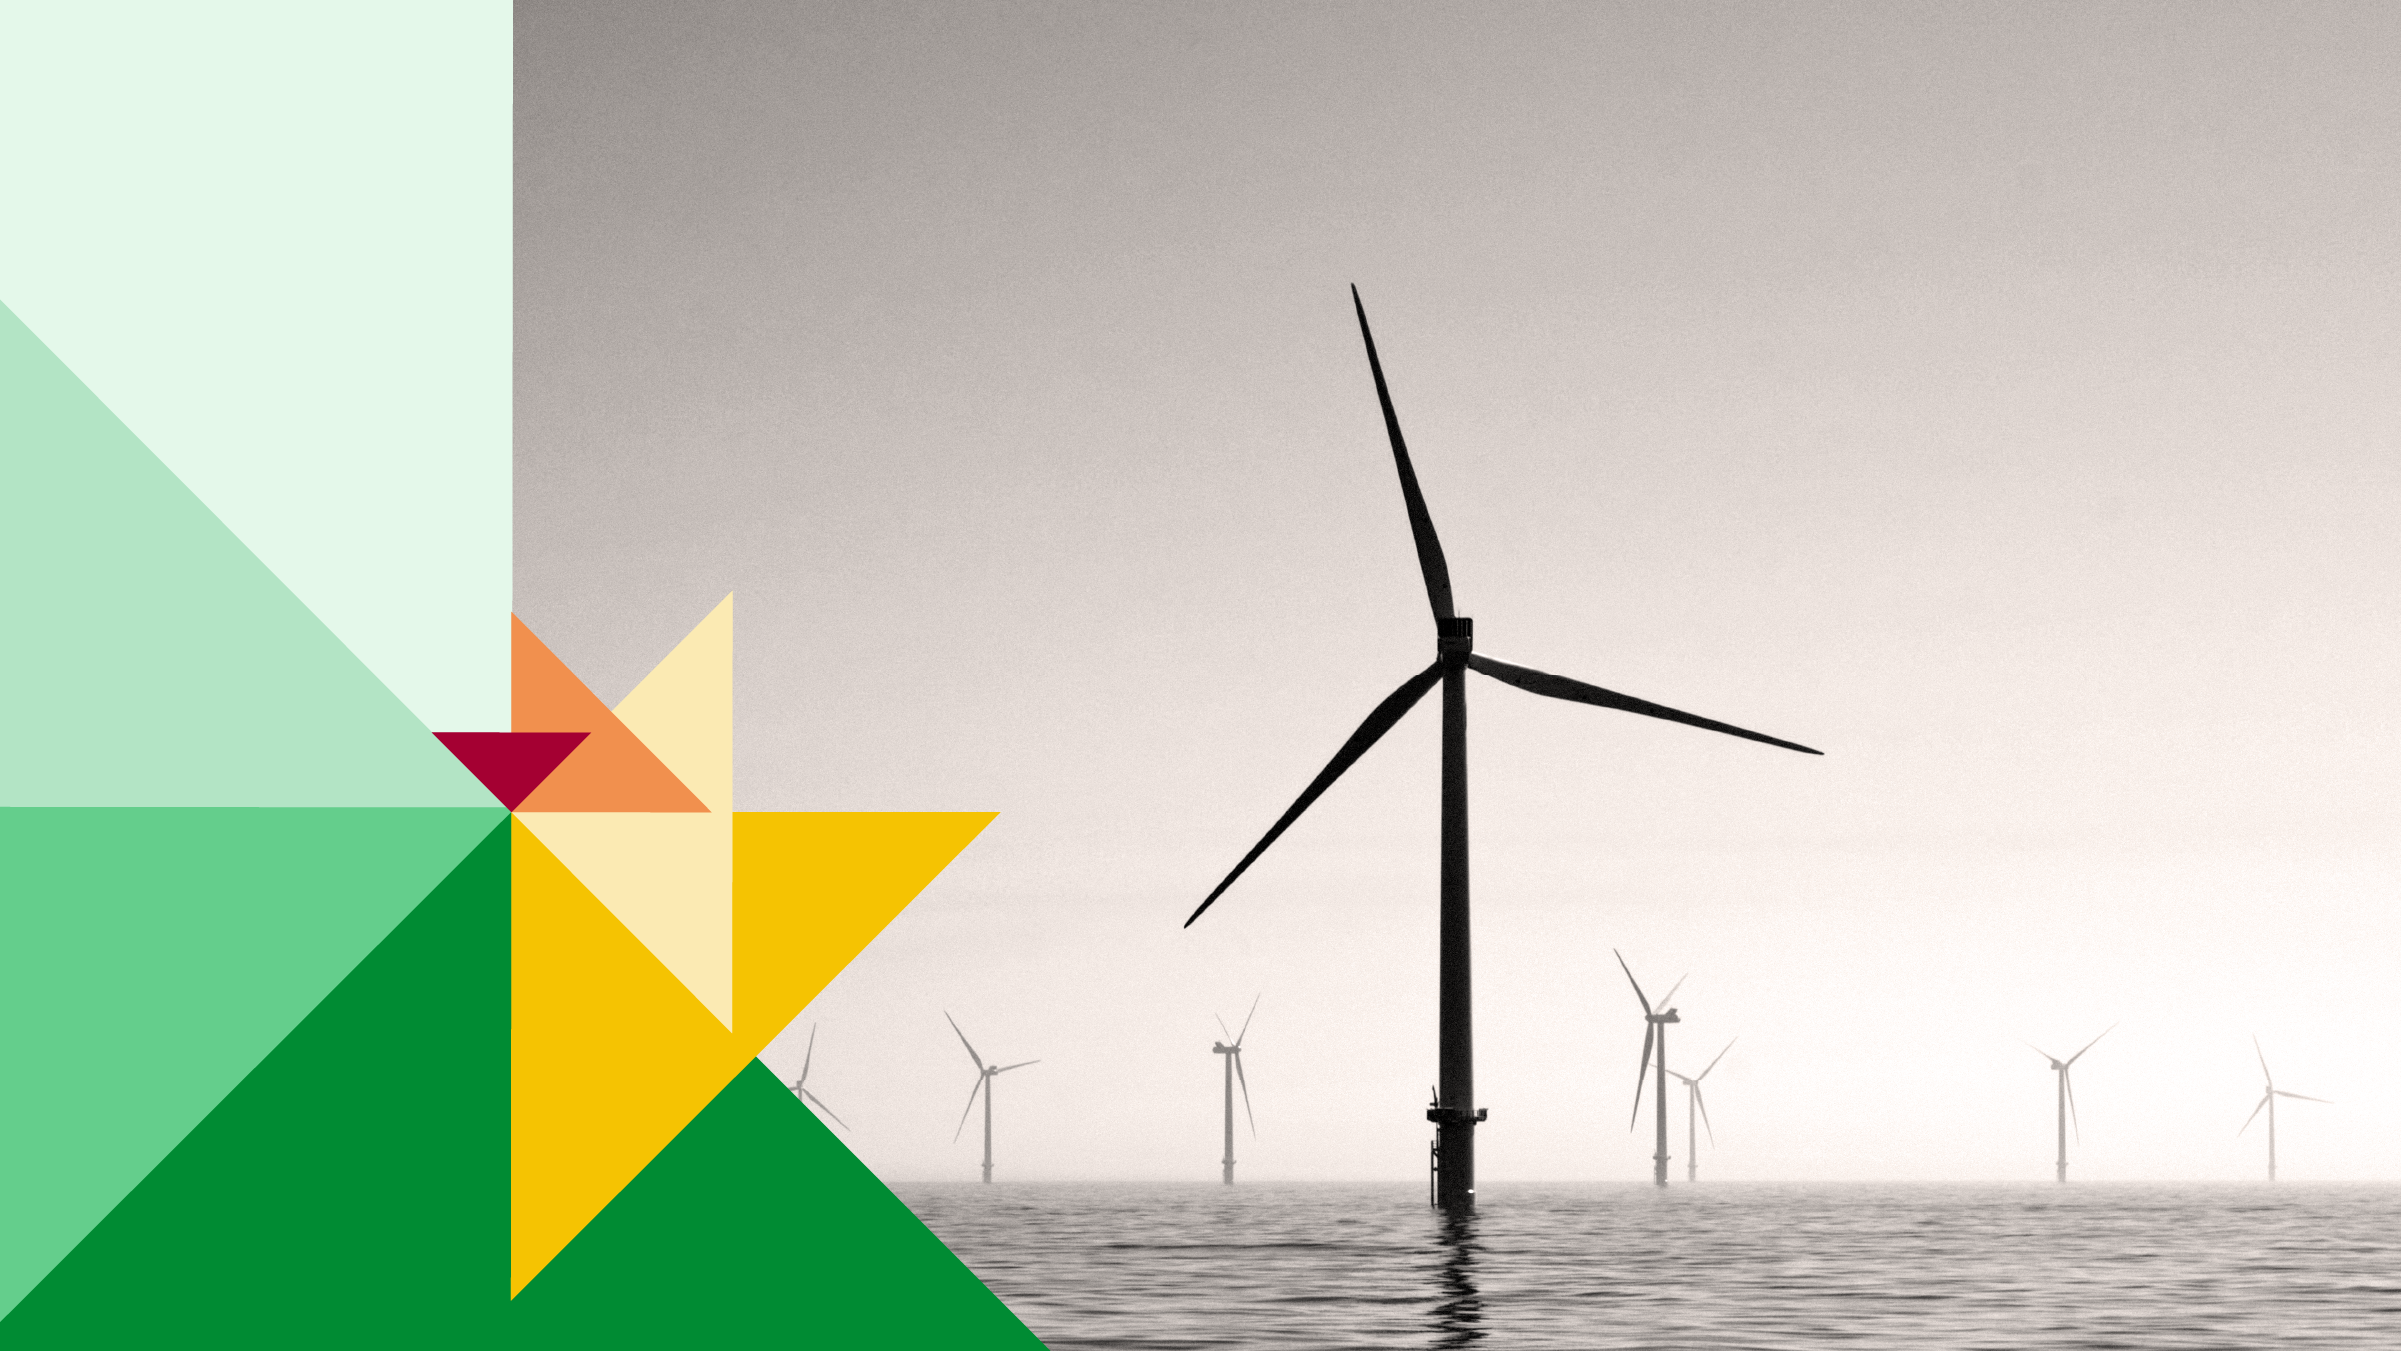 Photo collage of a green, yellow, and red spiral next to a black and white photograph of Wind Turbines in water.